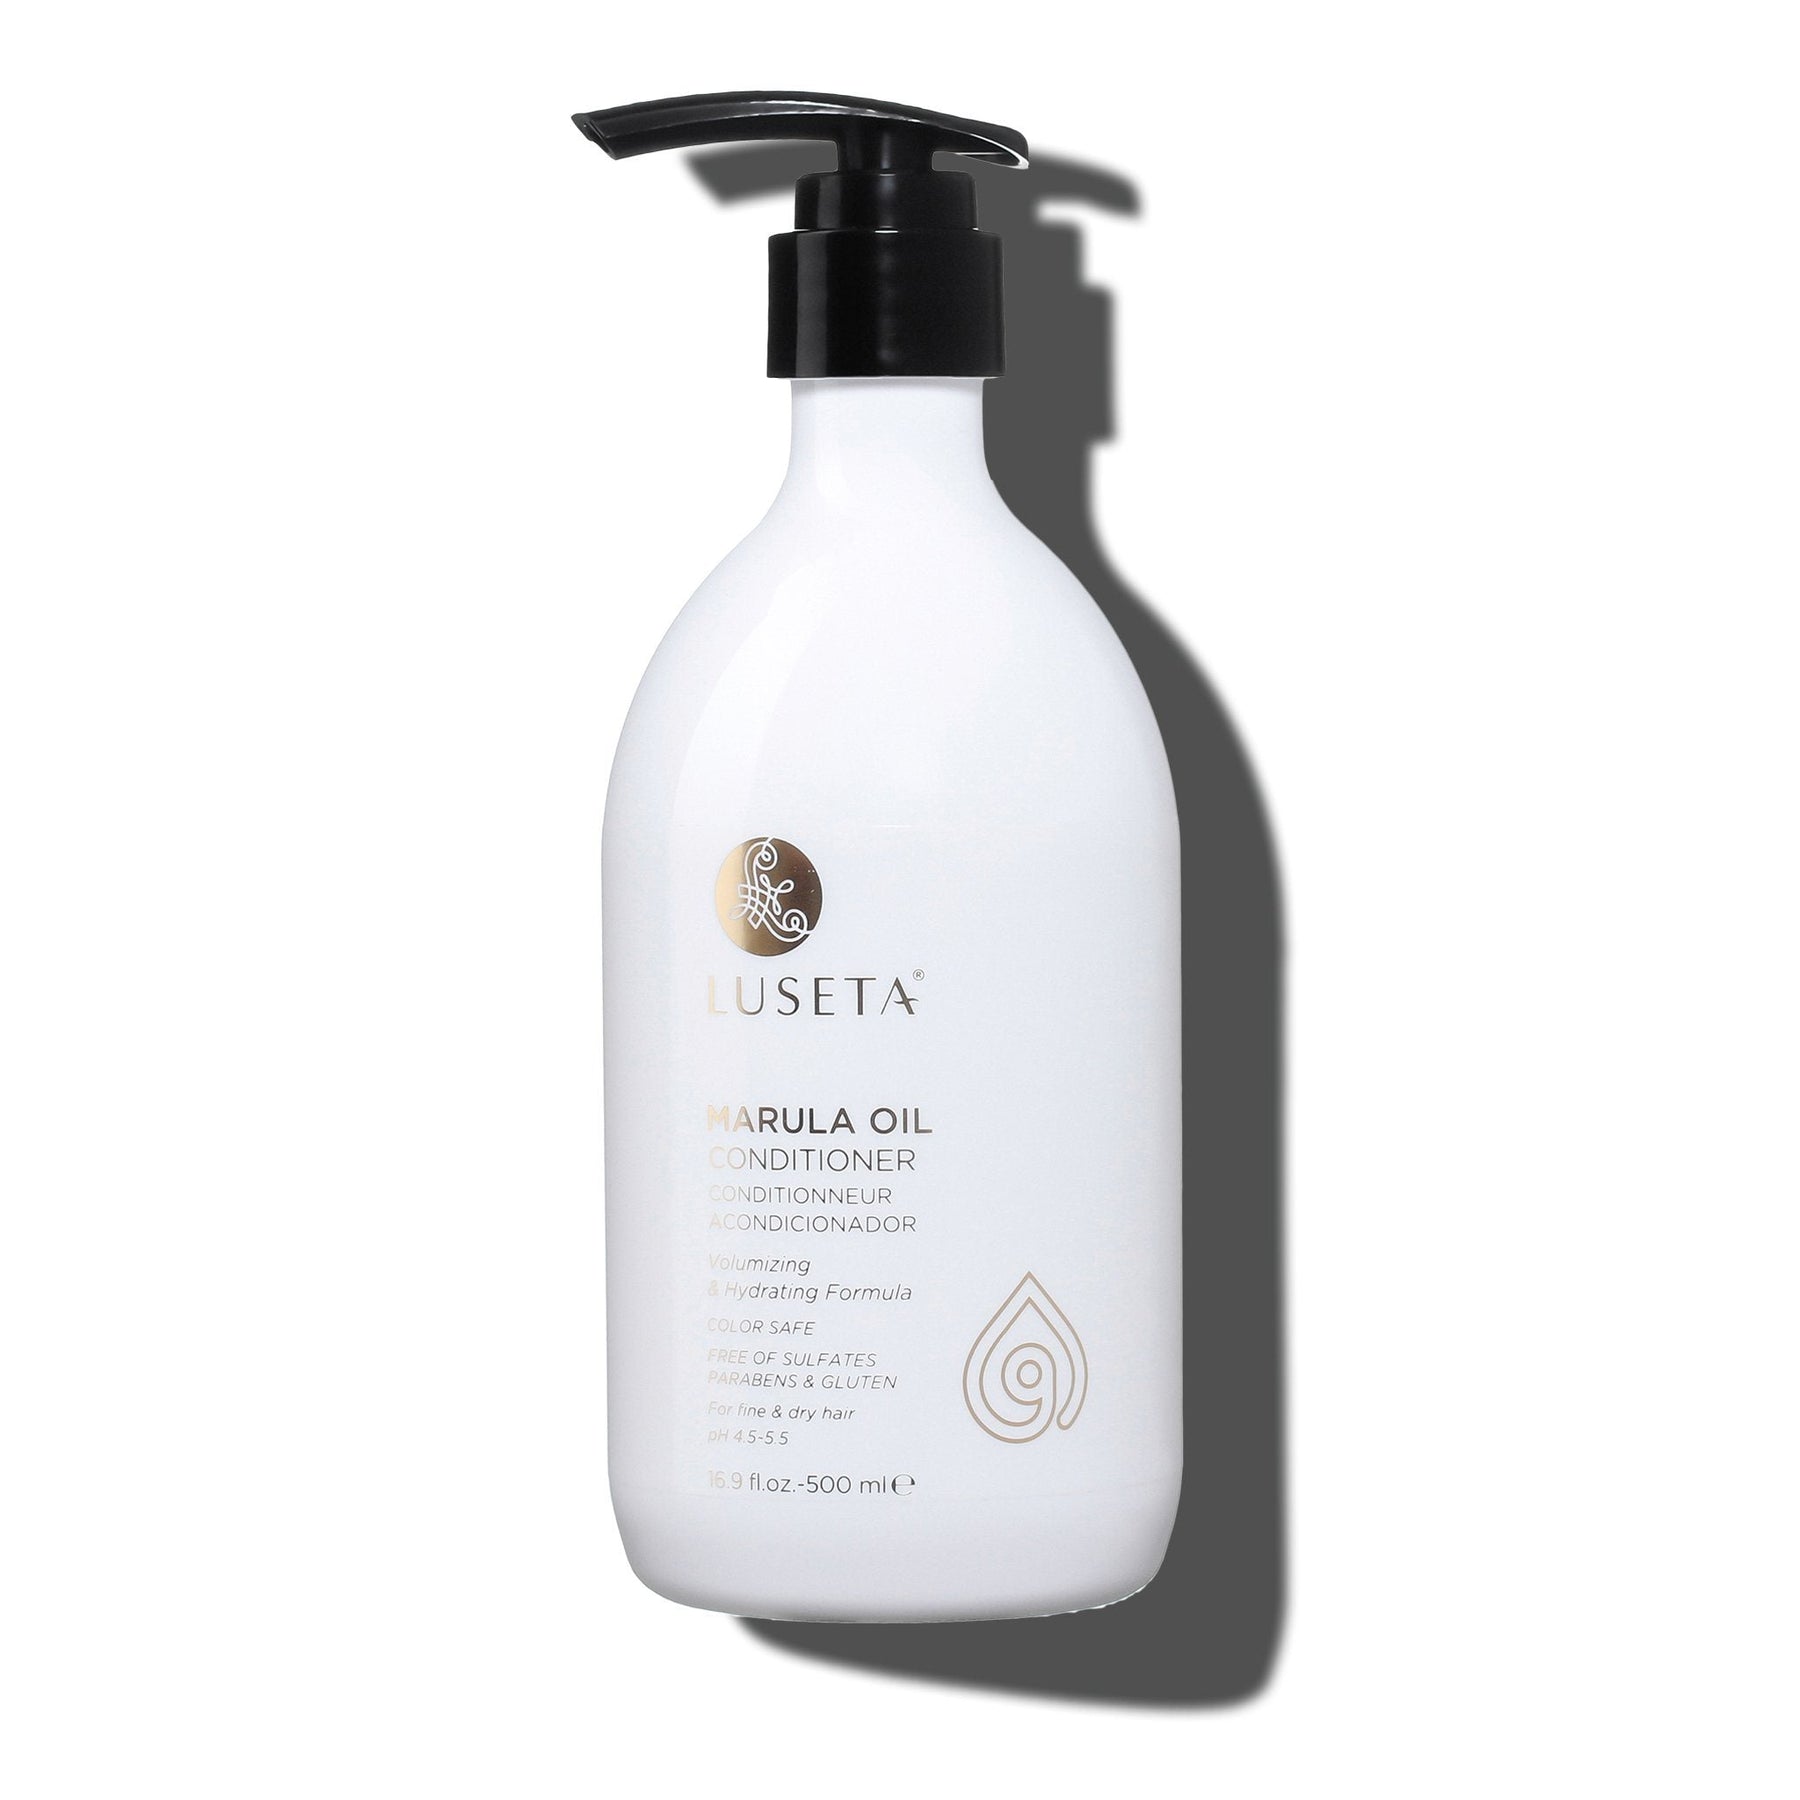 Marula Oil Conditioner - 16.9oz - by Luseta Beauty |ProCare Outlet|